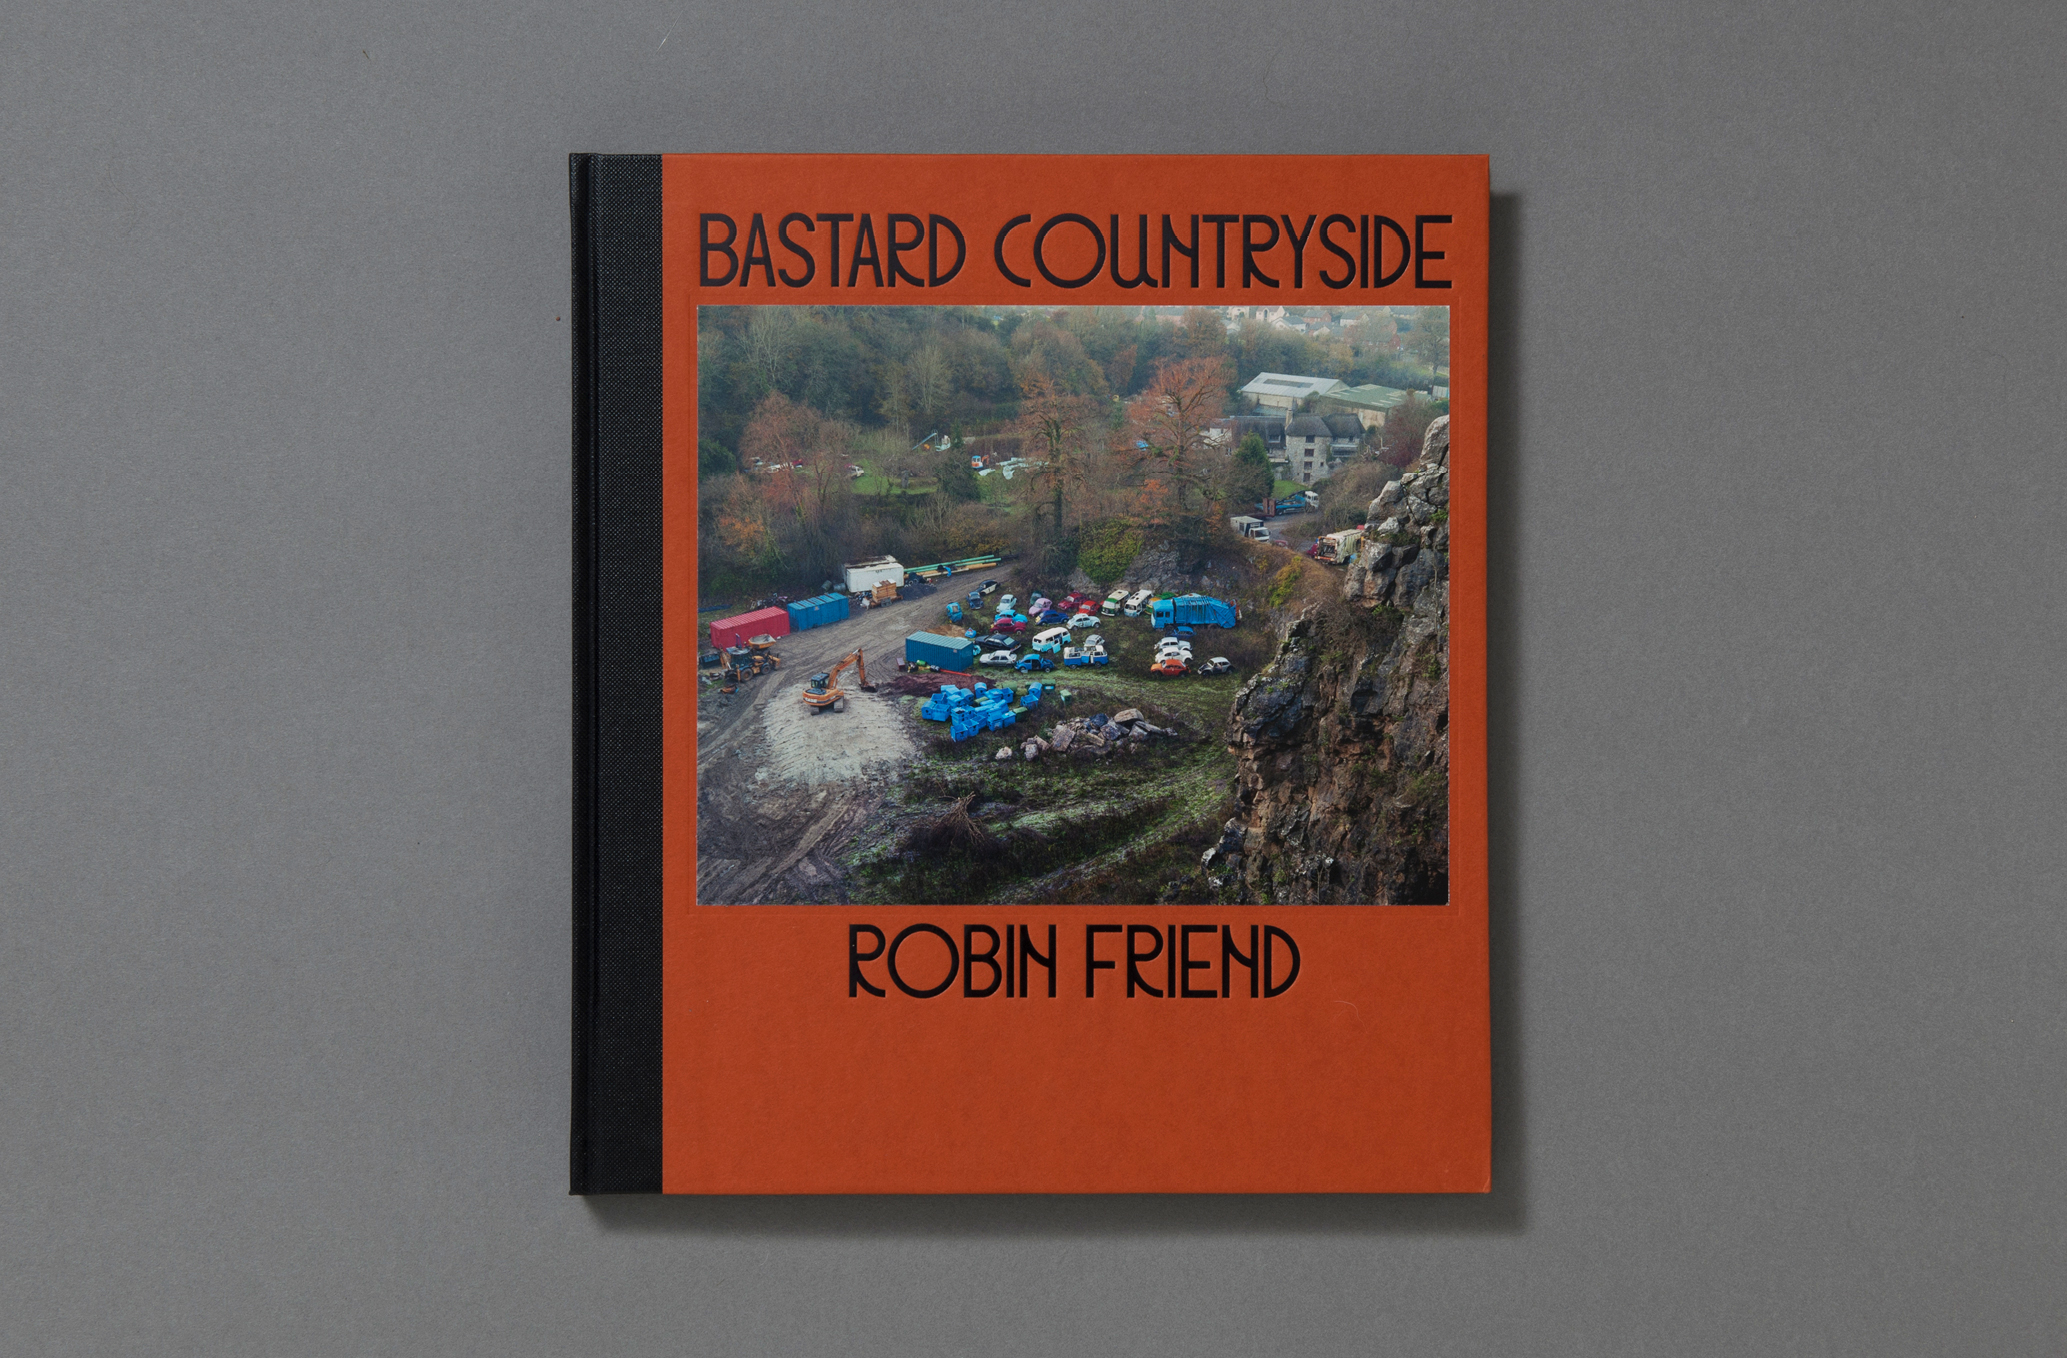 Bastard Countryside by Robin Friend - Fonts In Use